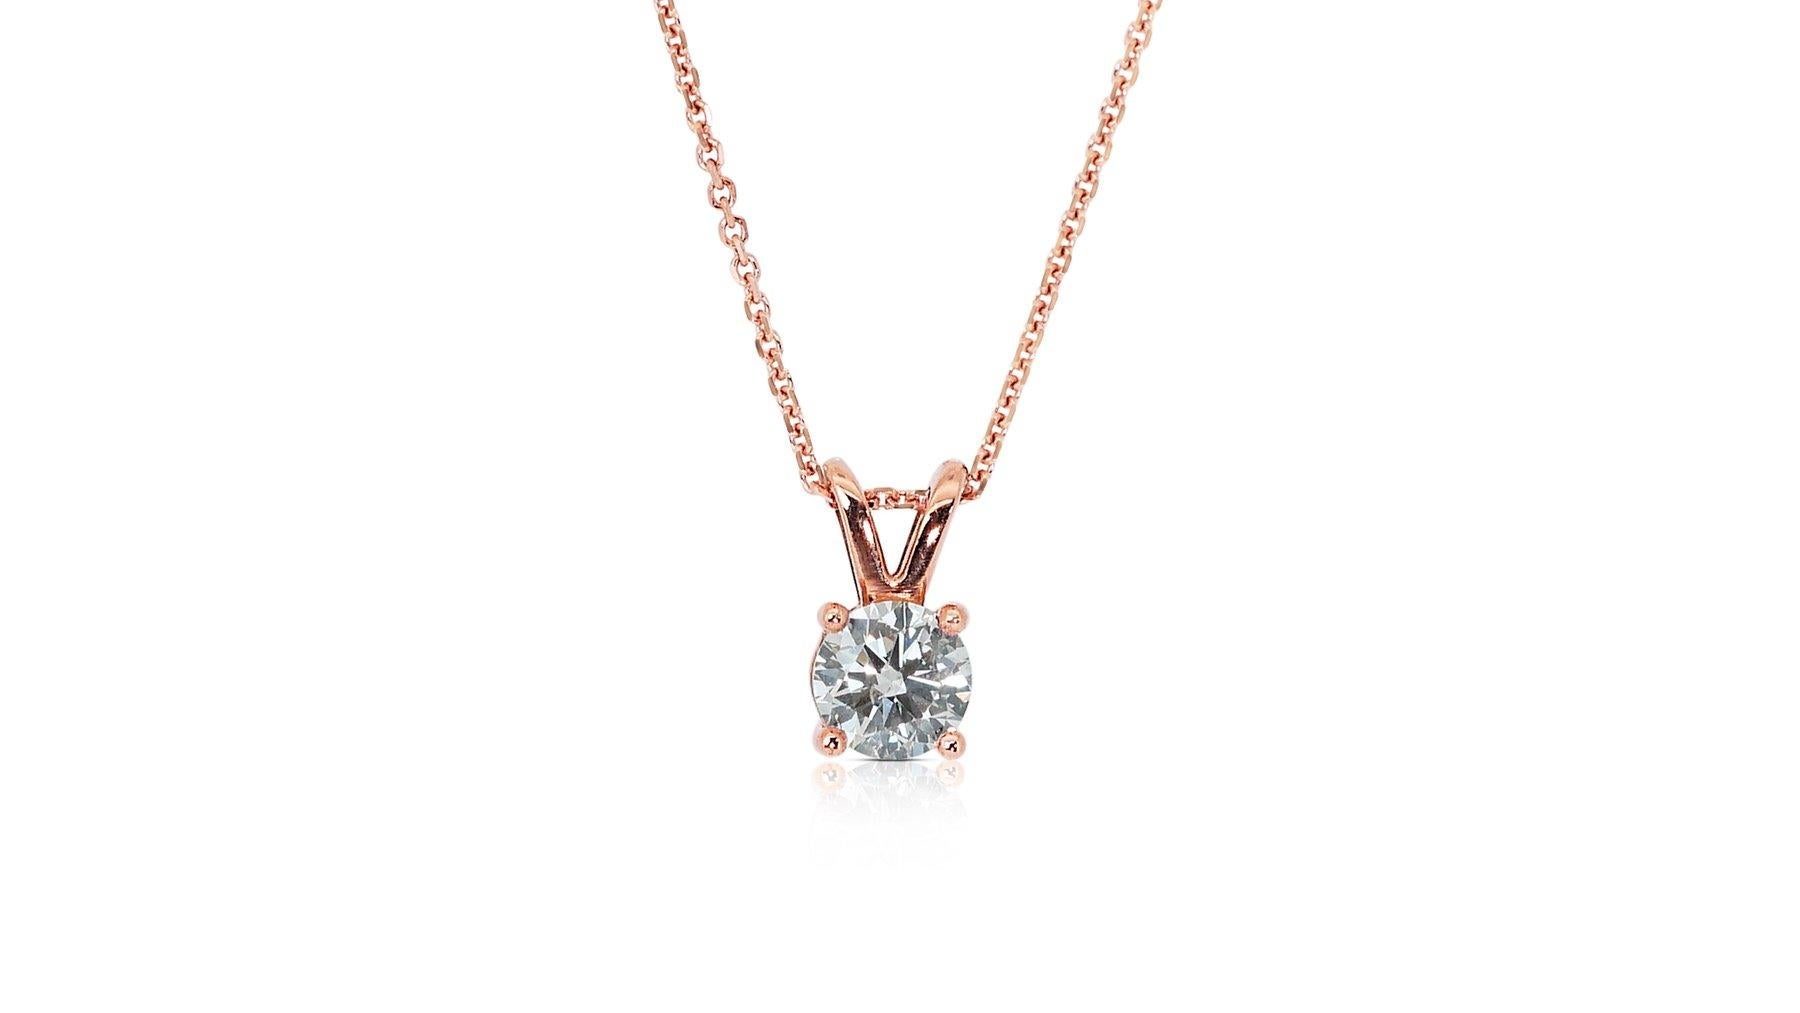 Radiant 0.70ct Diamond Solitaire Necklace in 18k Rose Gold - GIA Certified For Sale 1